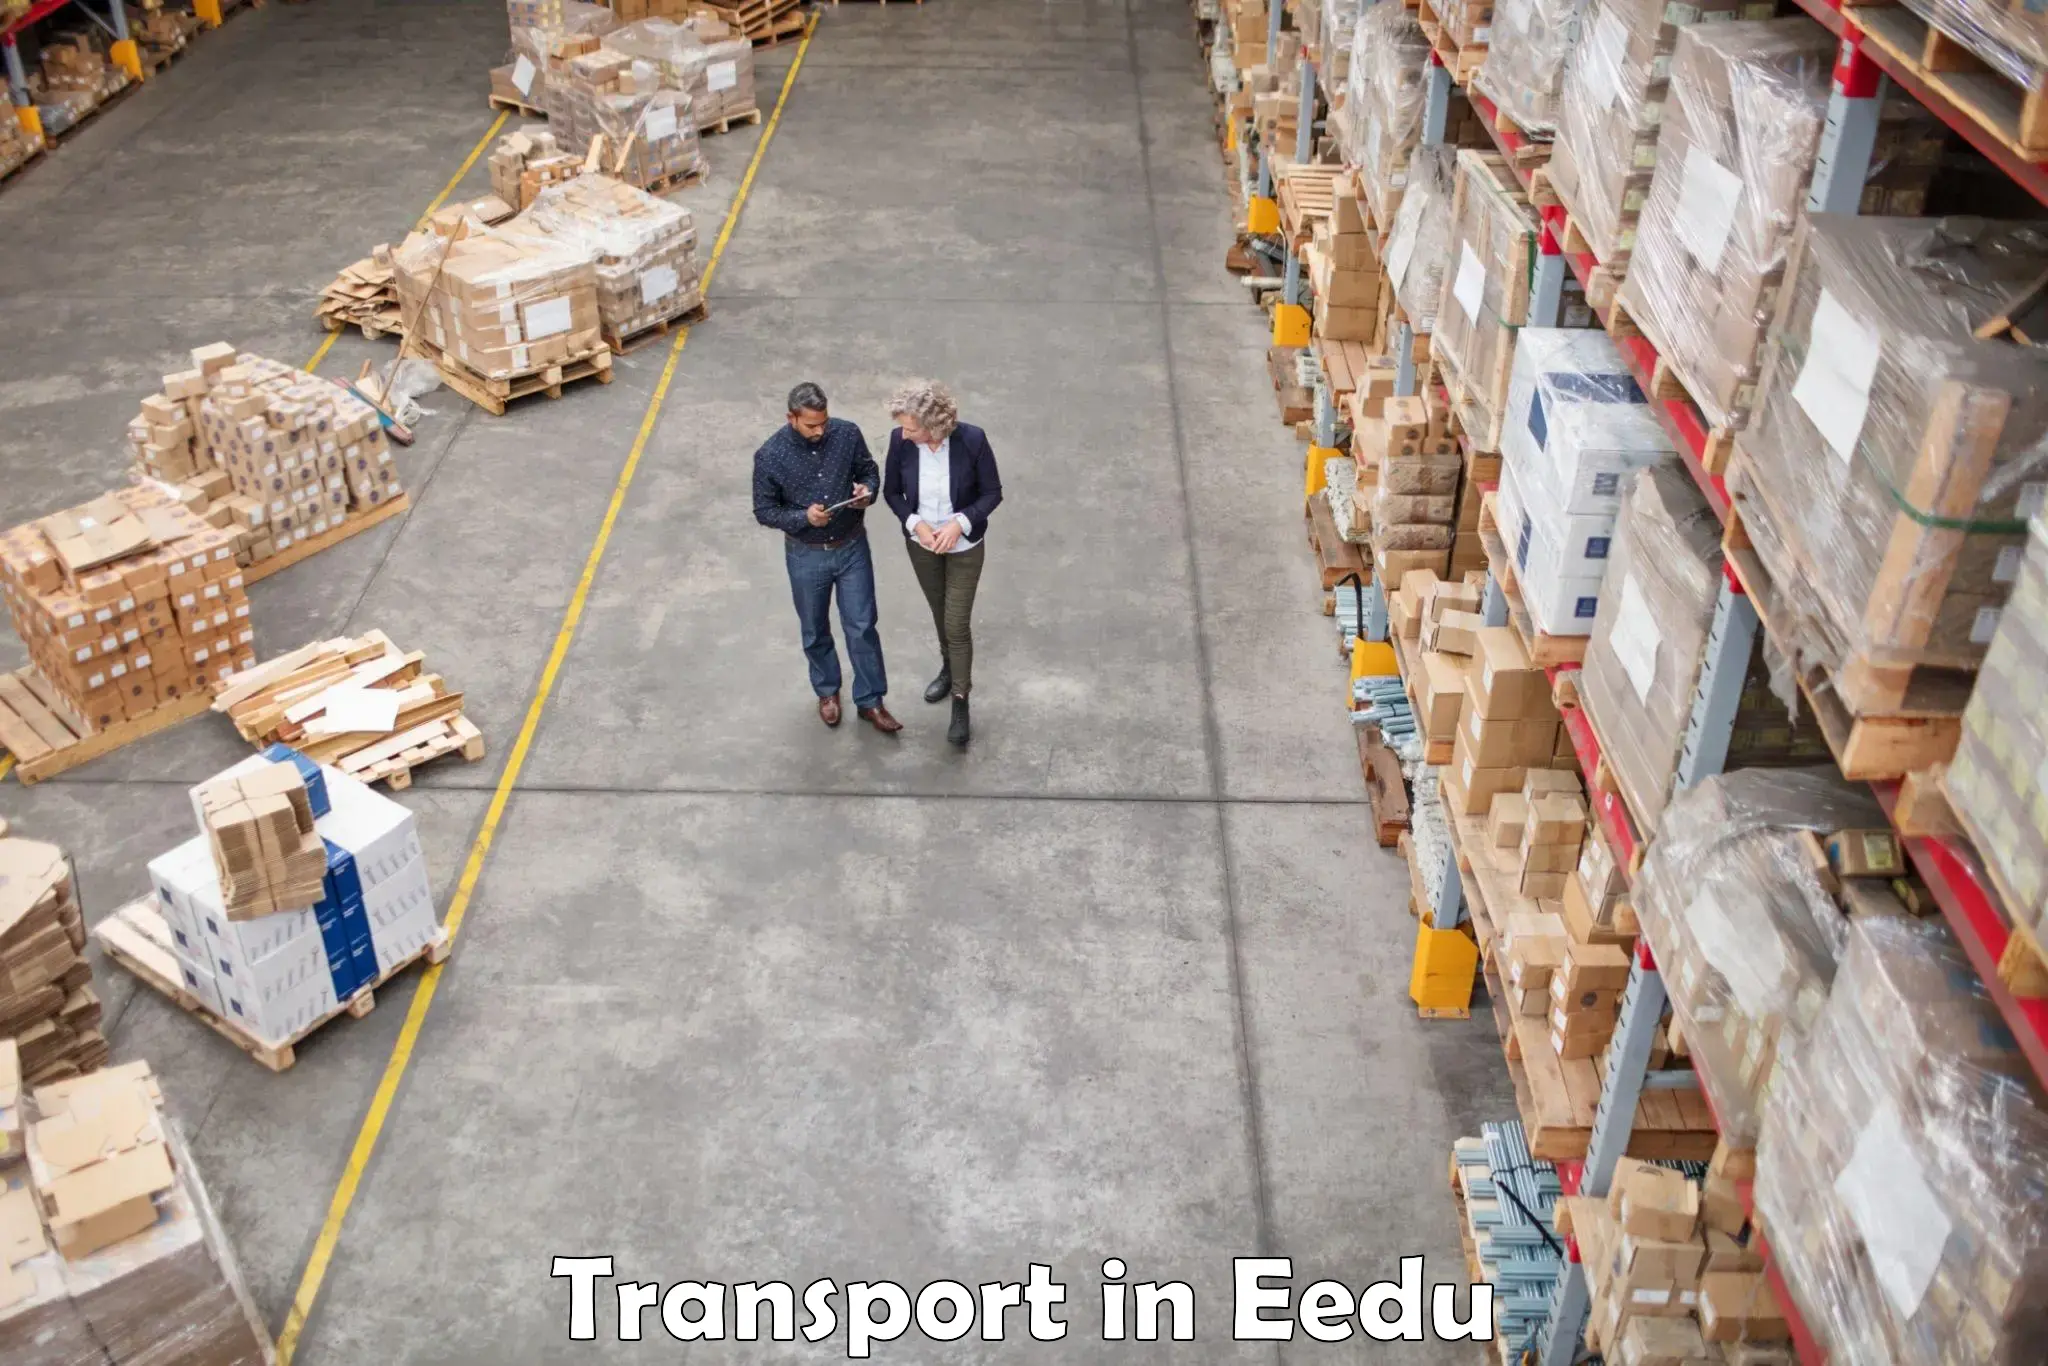 Transport shared services in Eedu